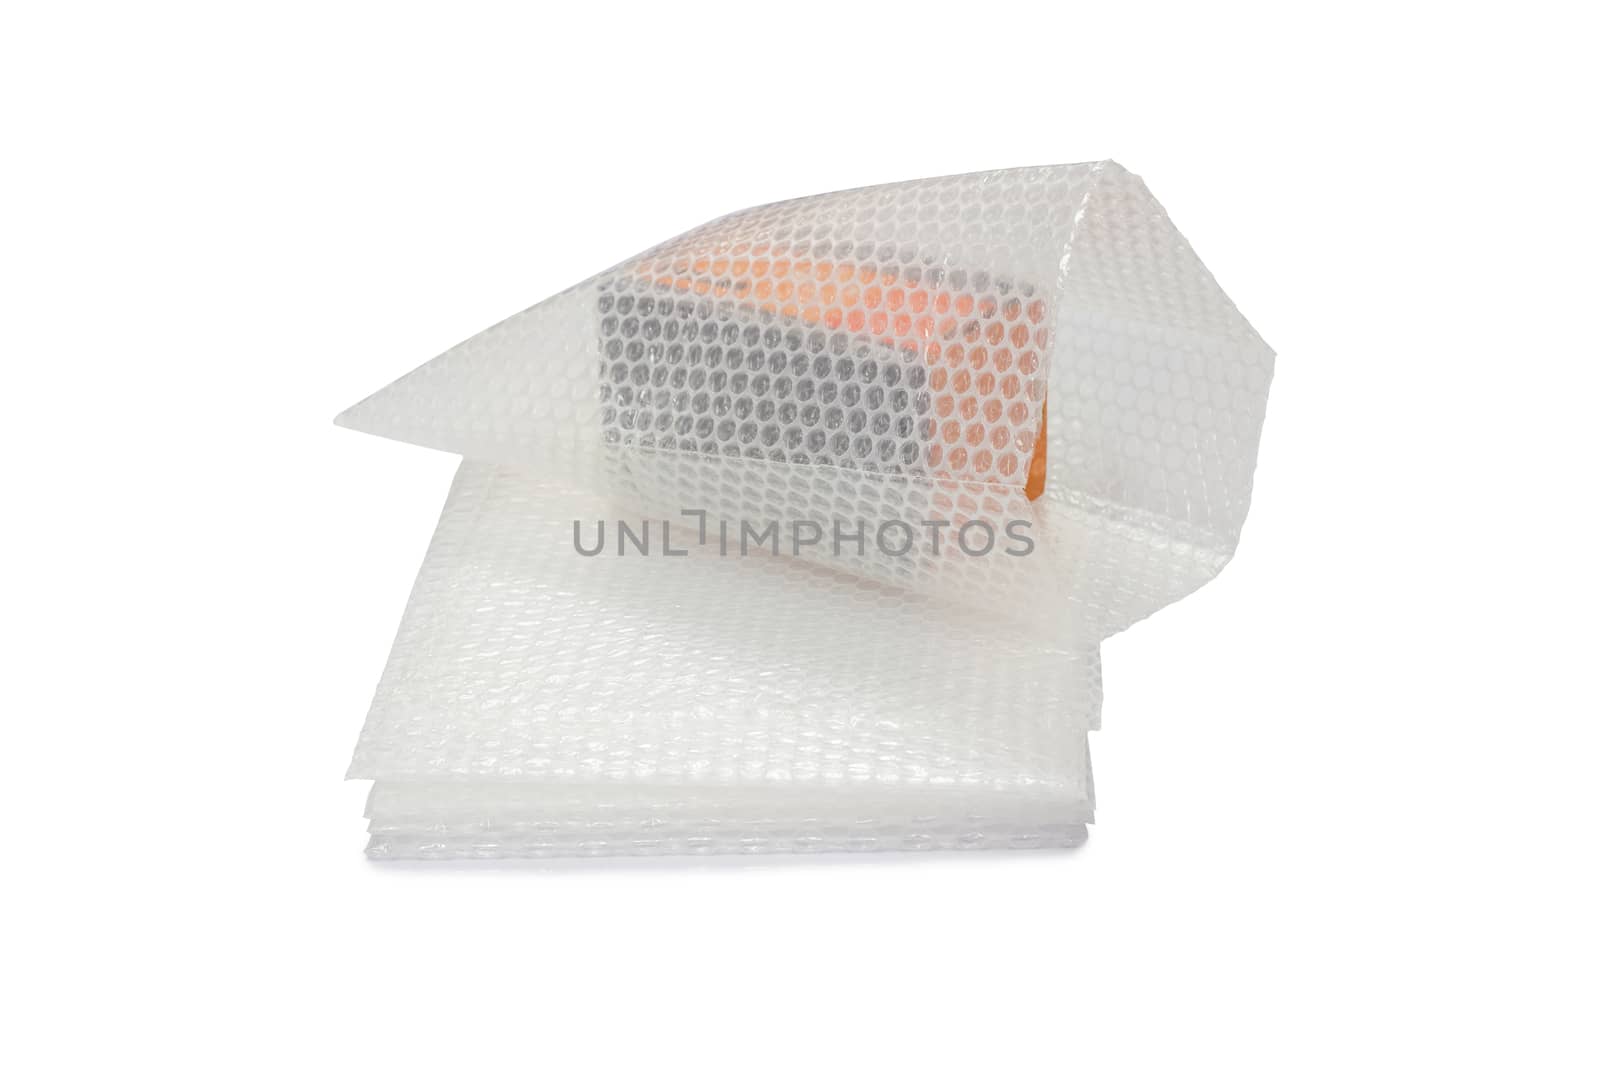 bubble wrap, for protection product cracked  or insurance During transit isolated and white background